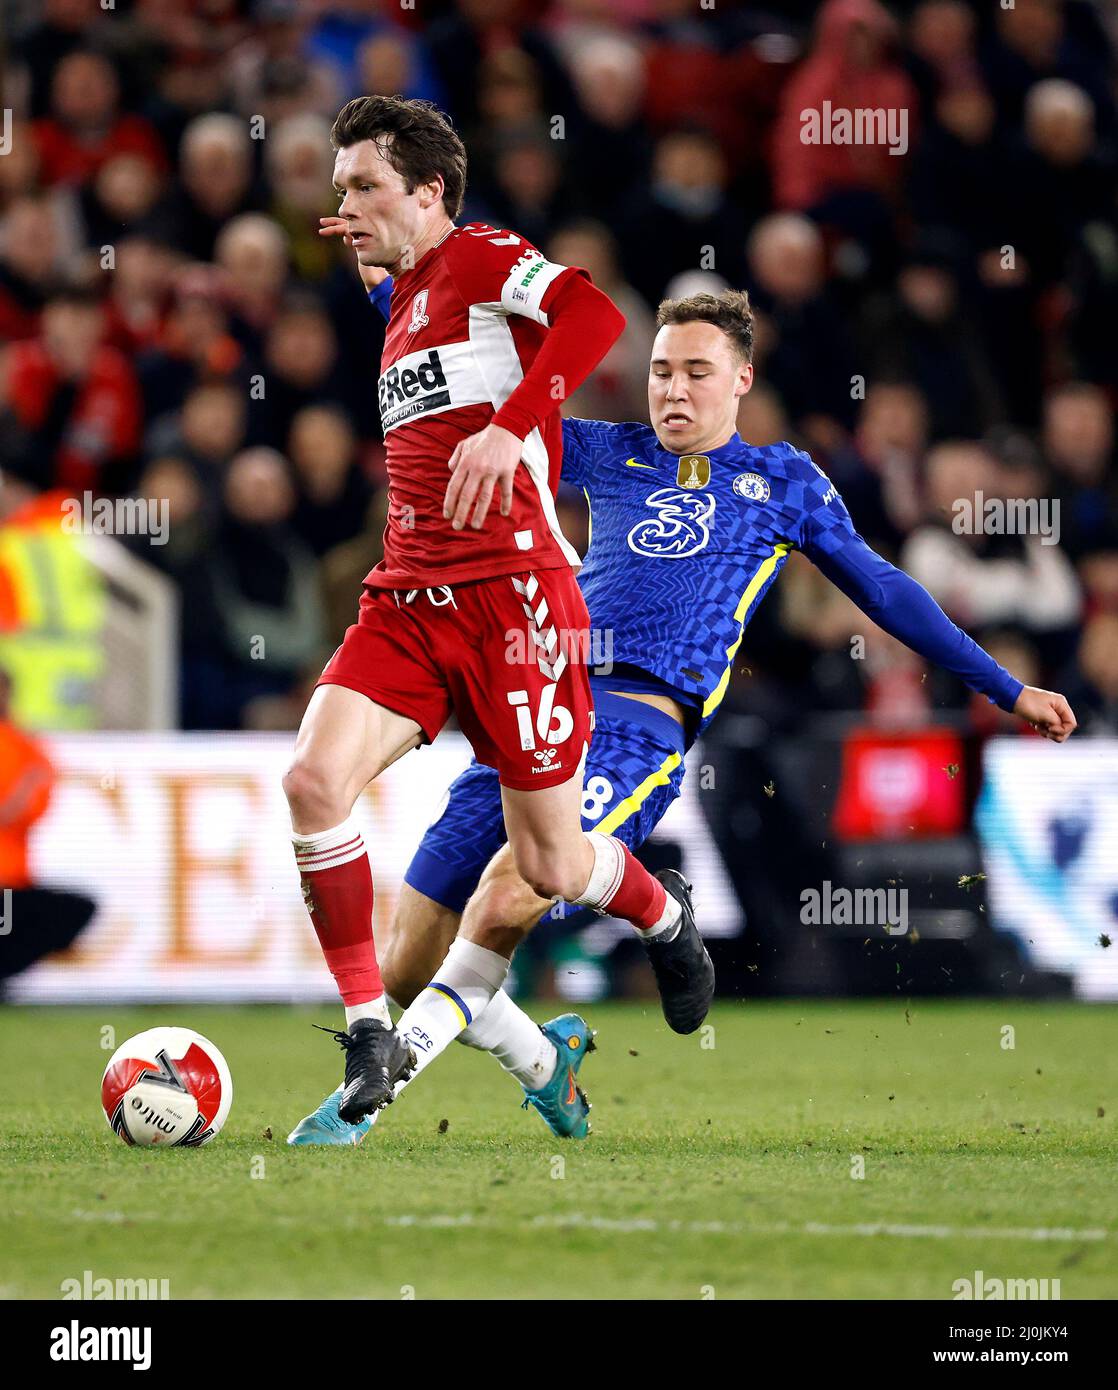 Chelsea's Harvey Vale (right) makes a tackle on Middlesbrough's Jonny Howson during the Emirates FA Cup quarter final match at the Riverside Stadium, Middlesbrough. Picture date: Saturday March 19, 2022. Stock Photo